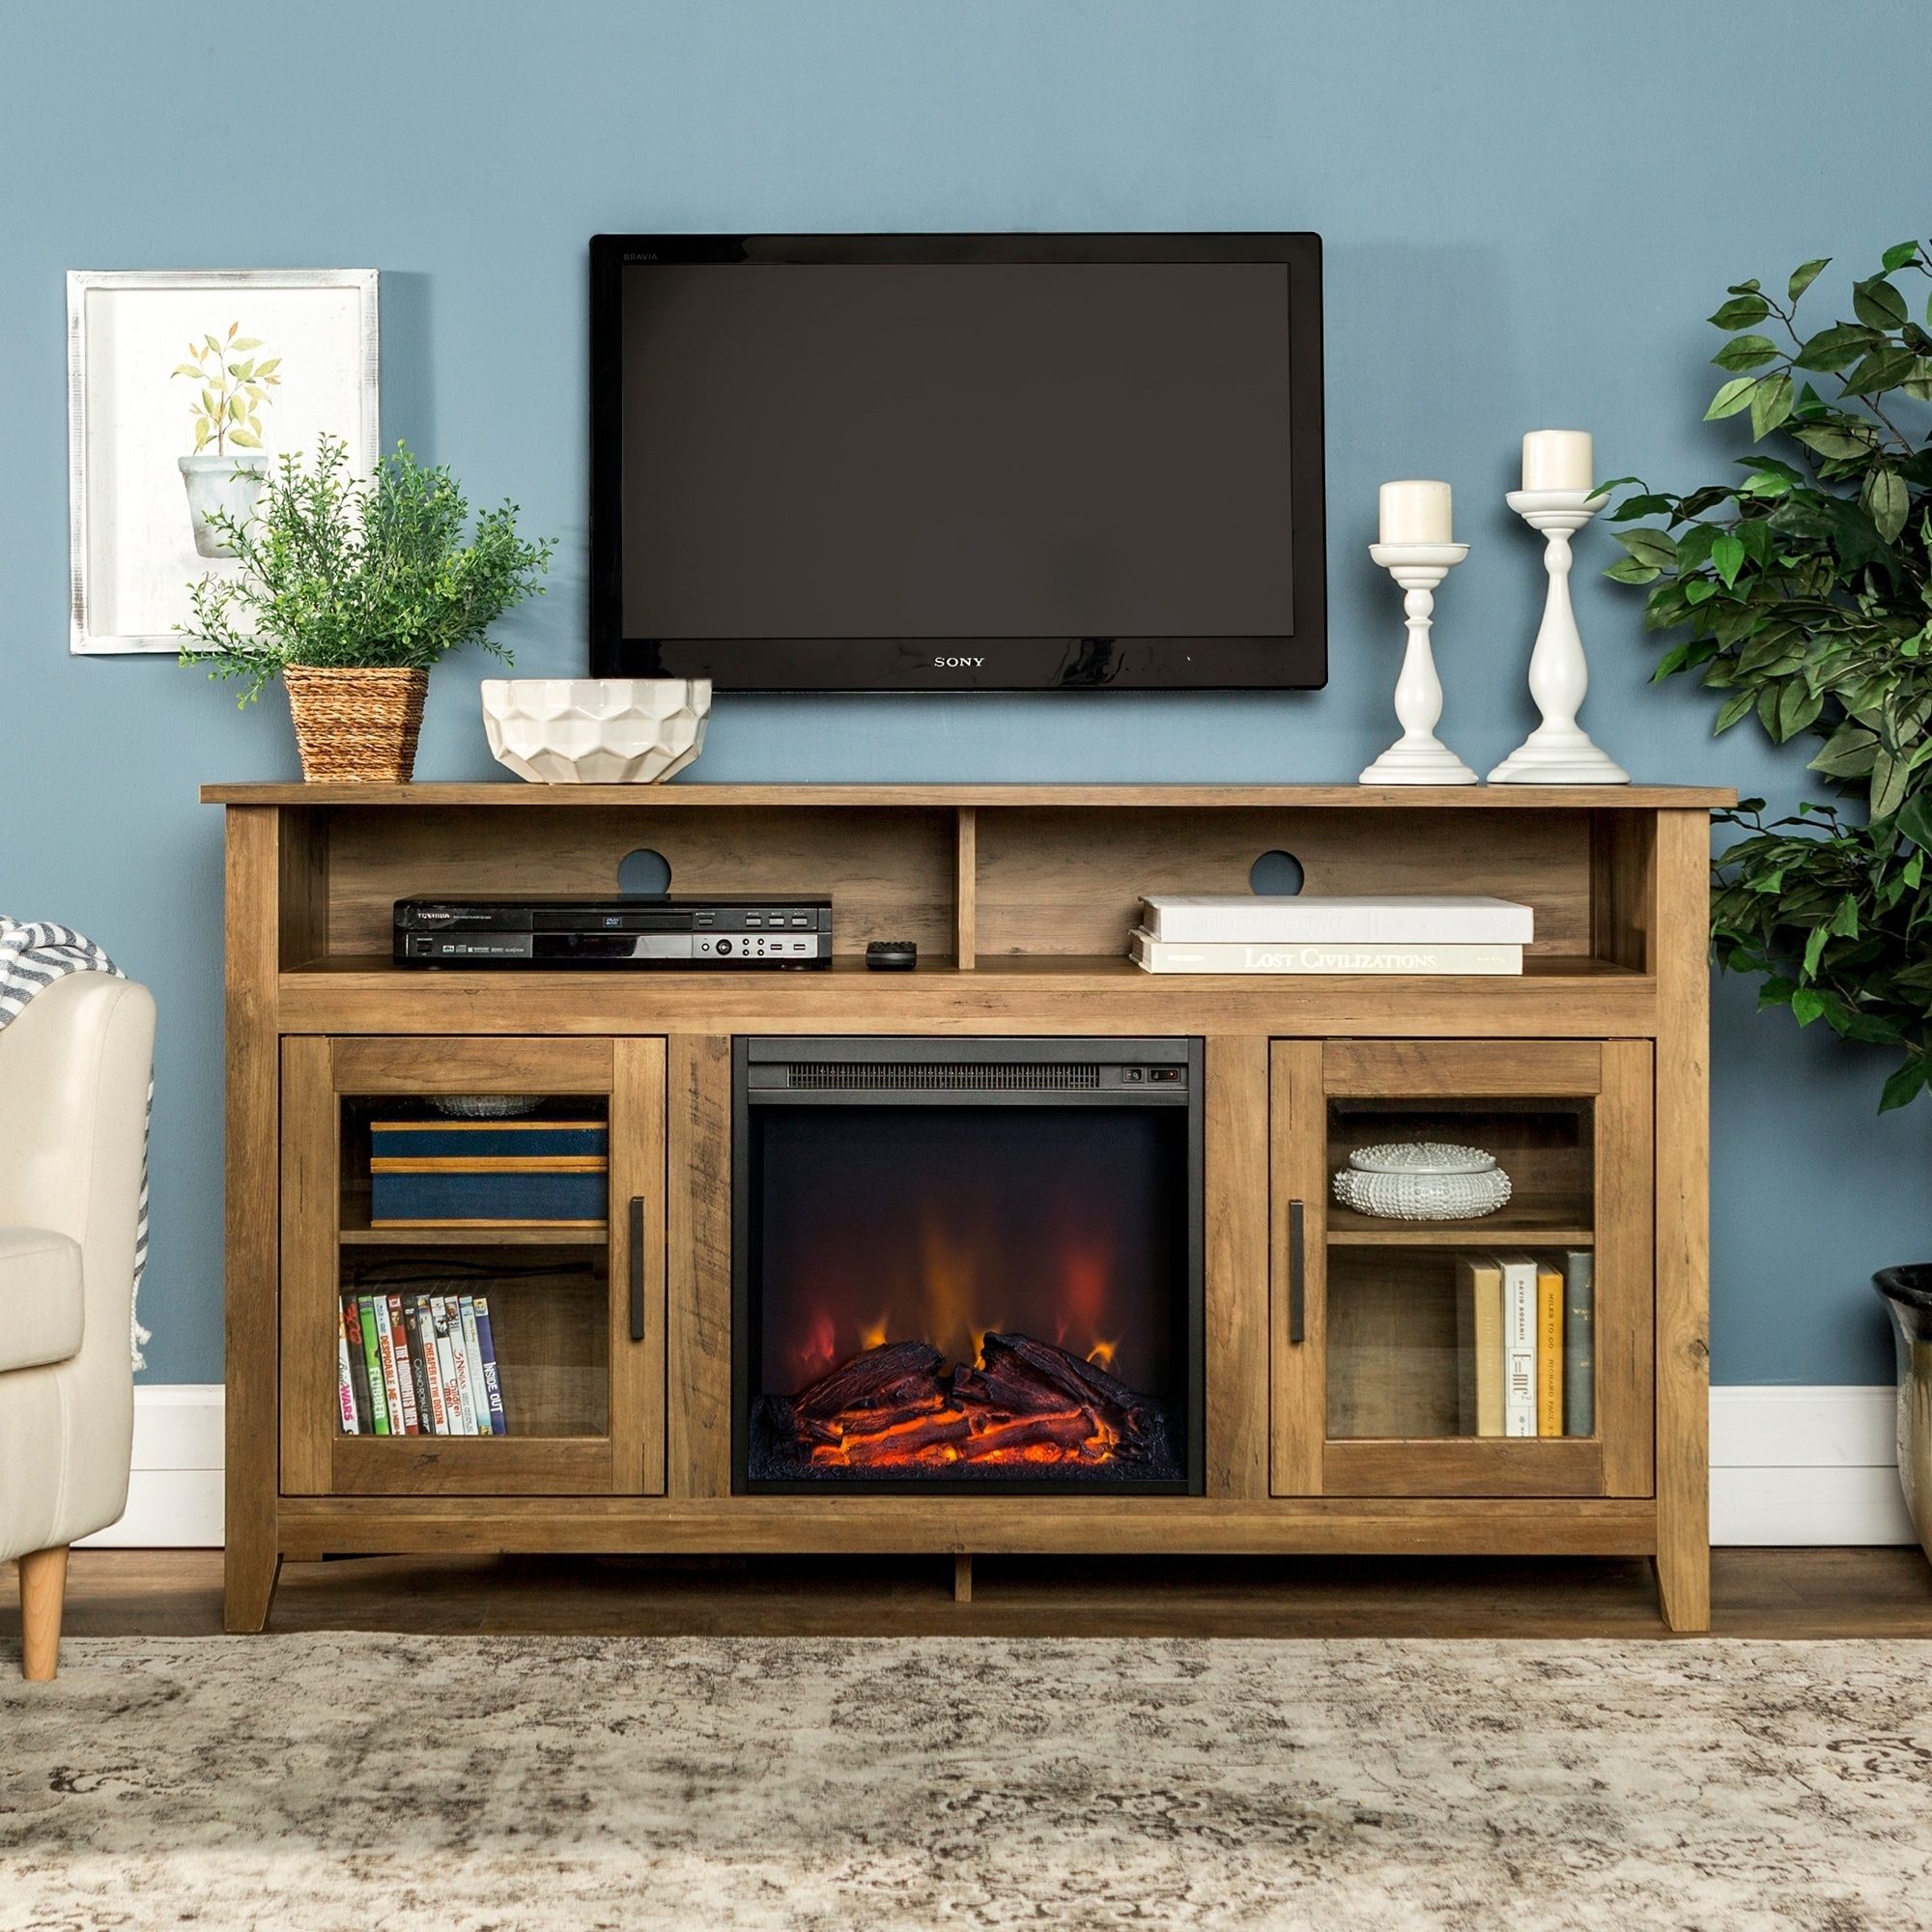 Fireplace Tv Stand Oak | Omeublog Secreto Within Modern Farmhouse Fireplace Credenza Tv Stands Rustic Gray Finish (Photo 2 of 15)